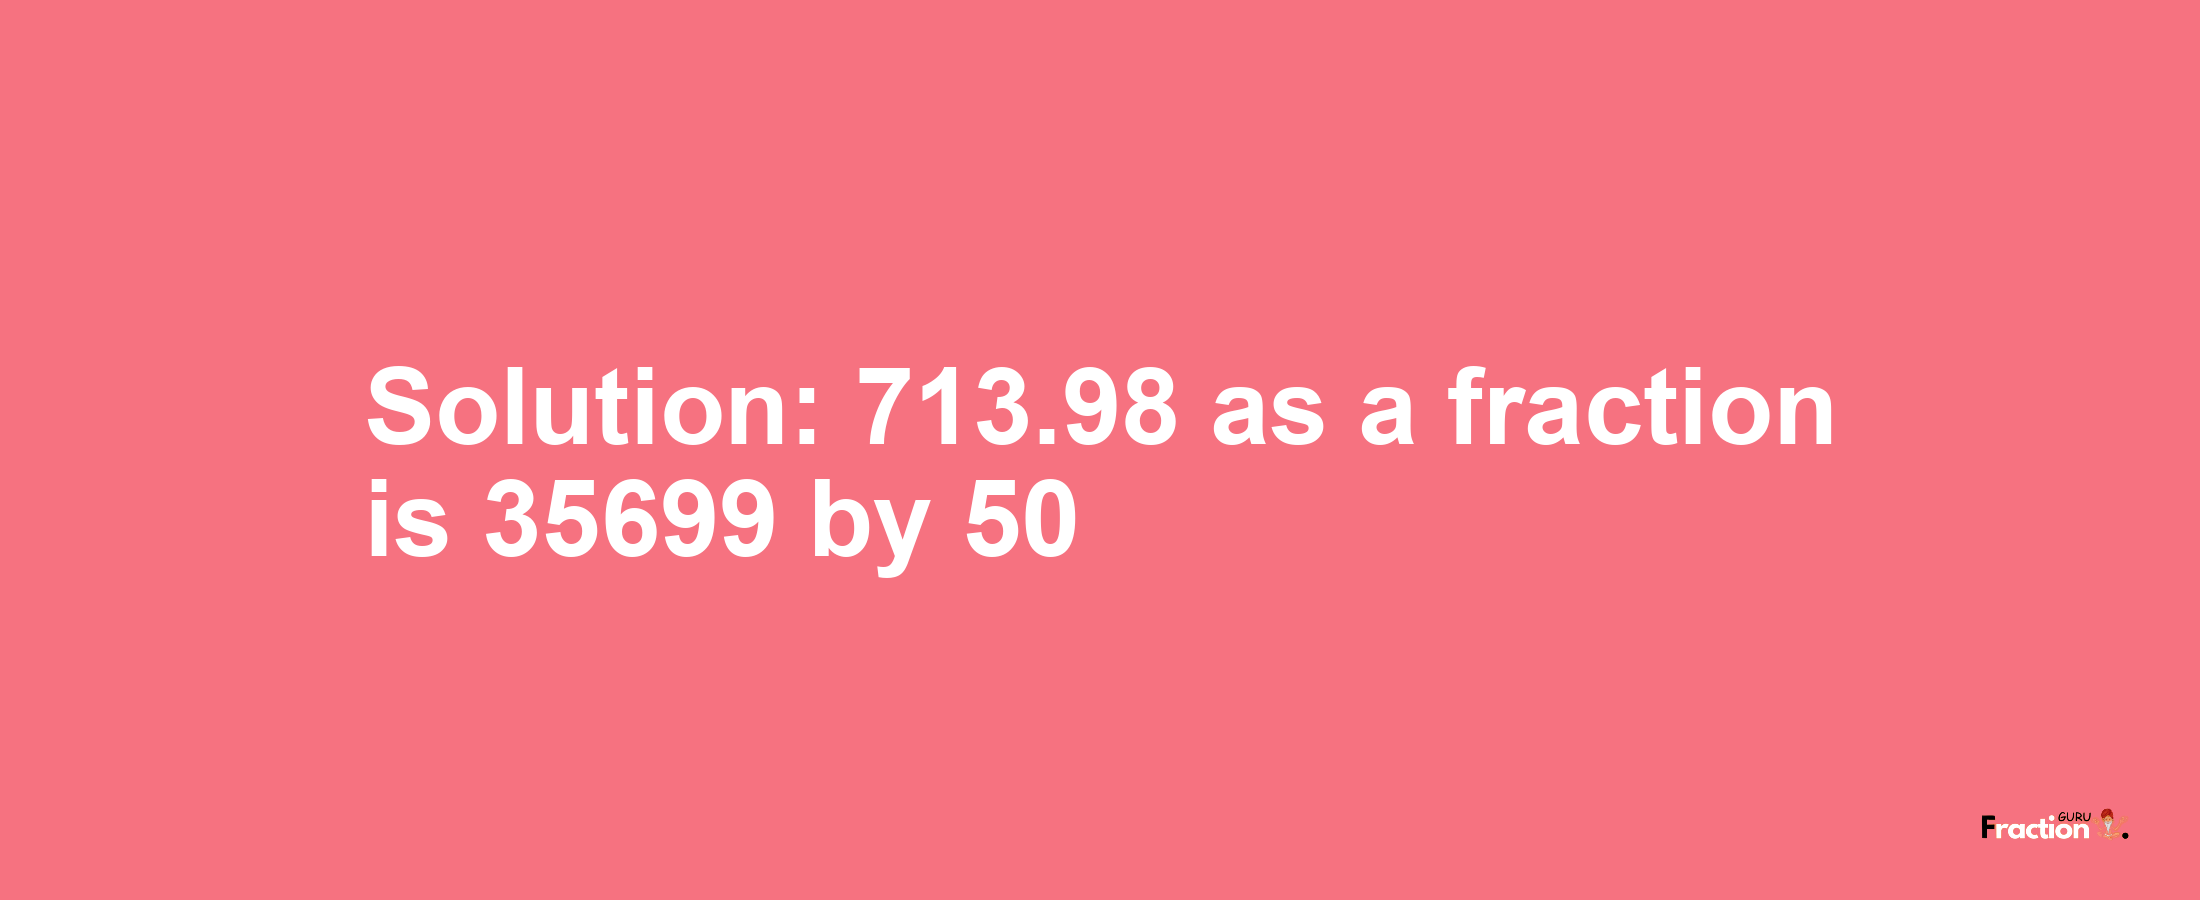 Solution:713.98 as a fraction is 35699/50